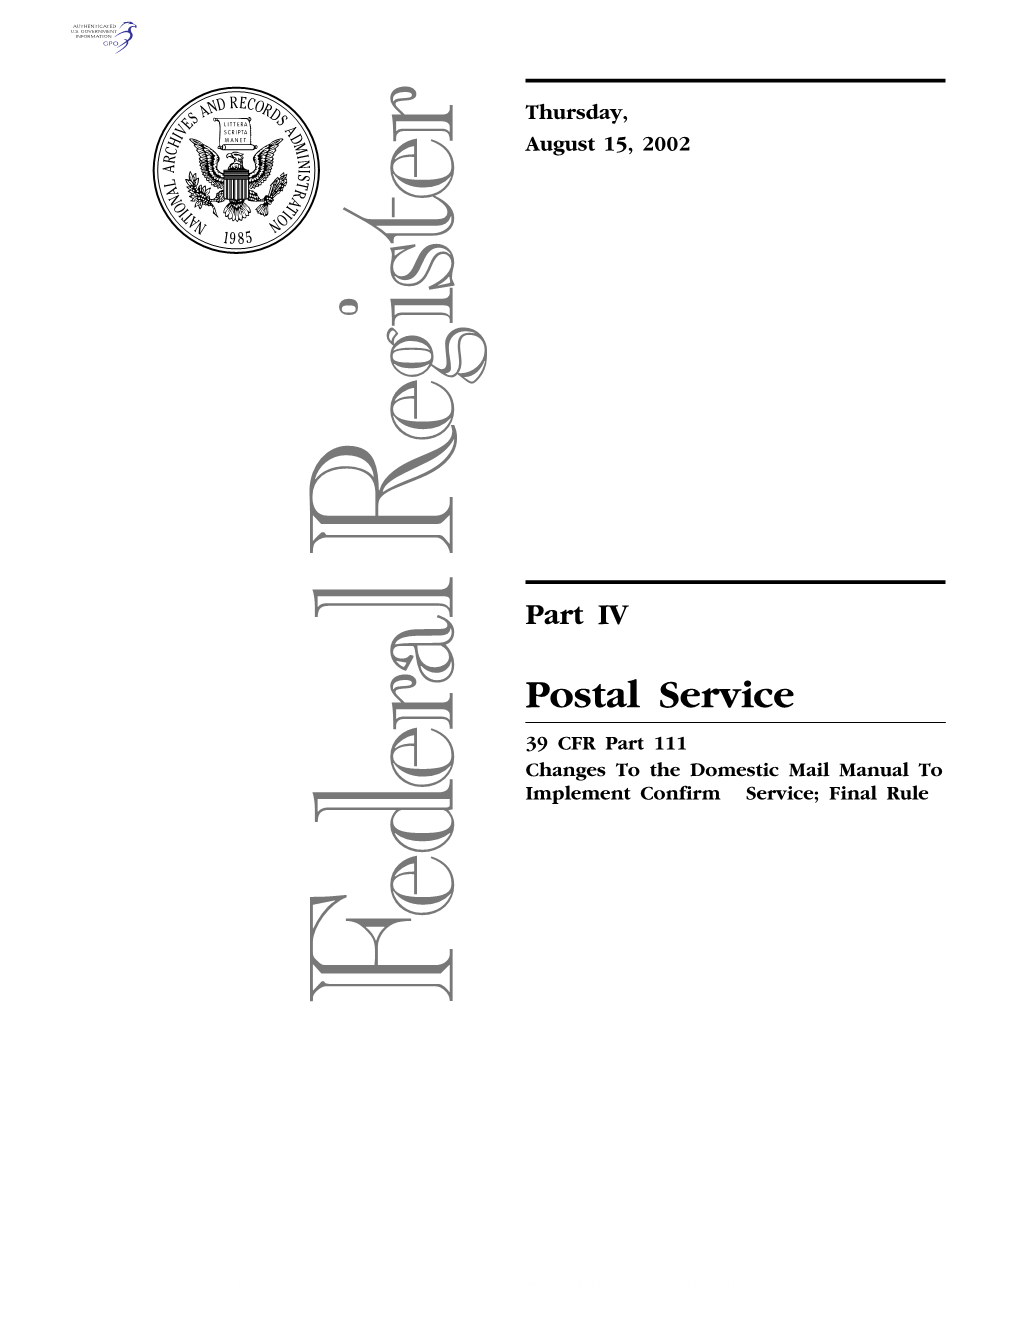 Postal Service 39 CFR Part 111 Changes to the Domestic Mail Manual to Implement Confirm Service; Final Rule